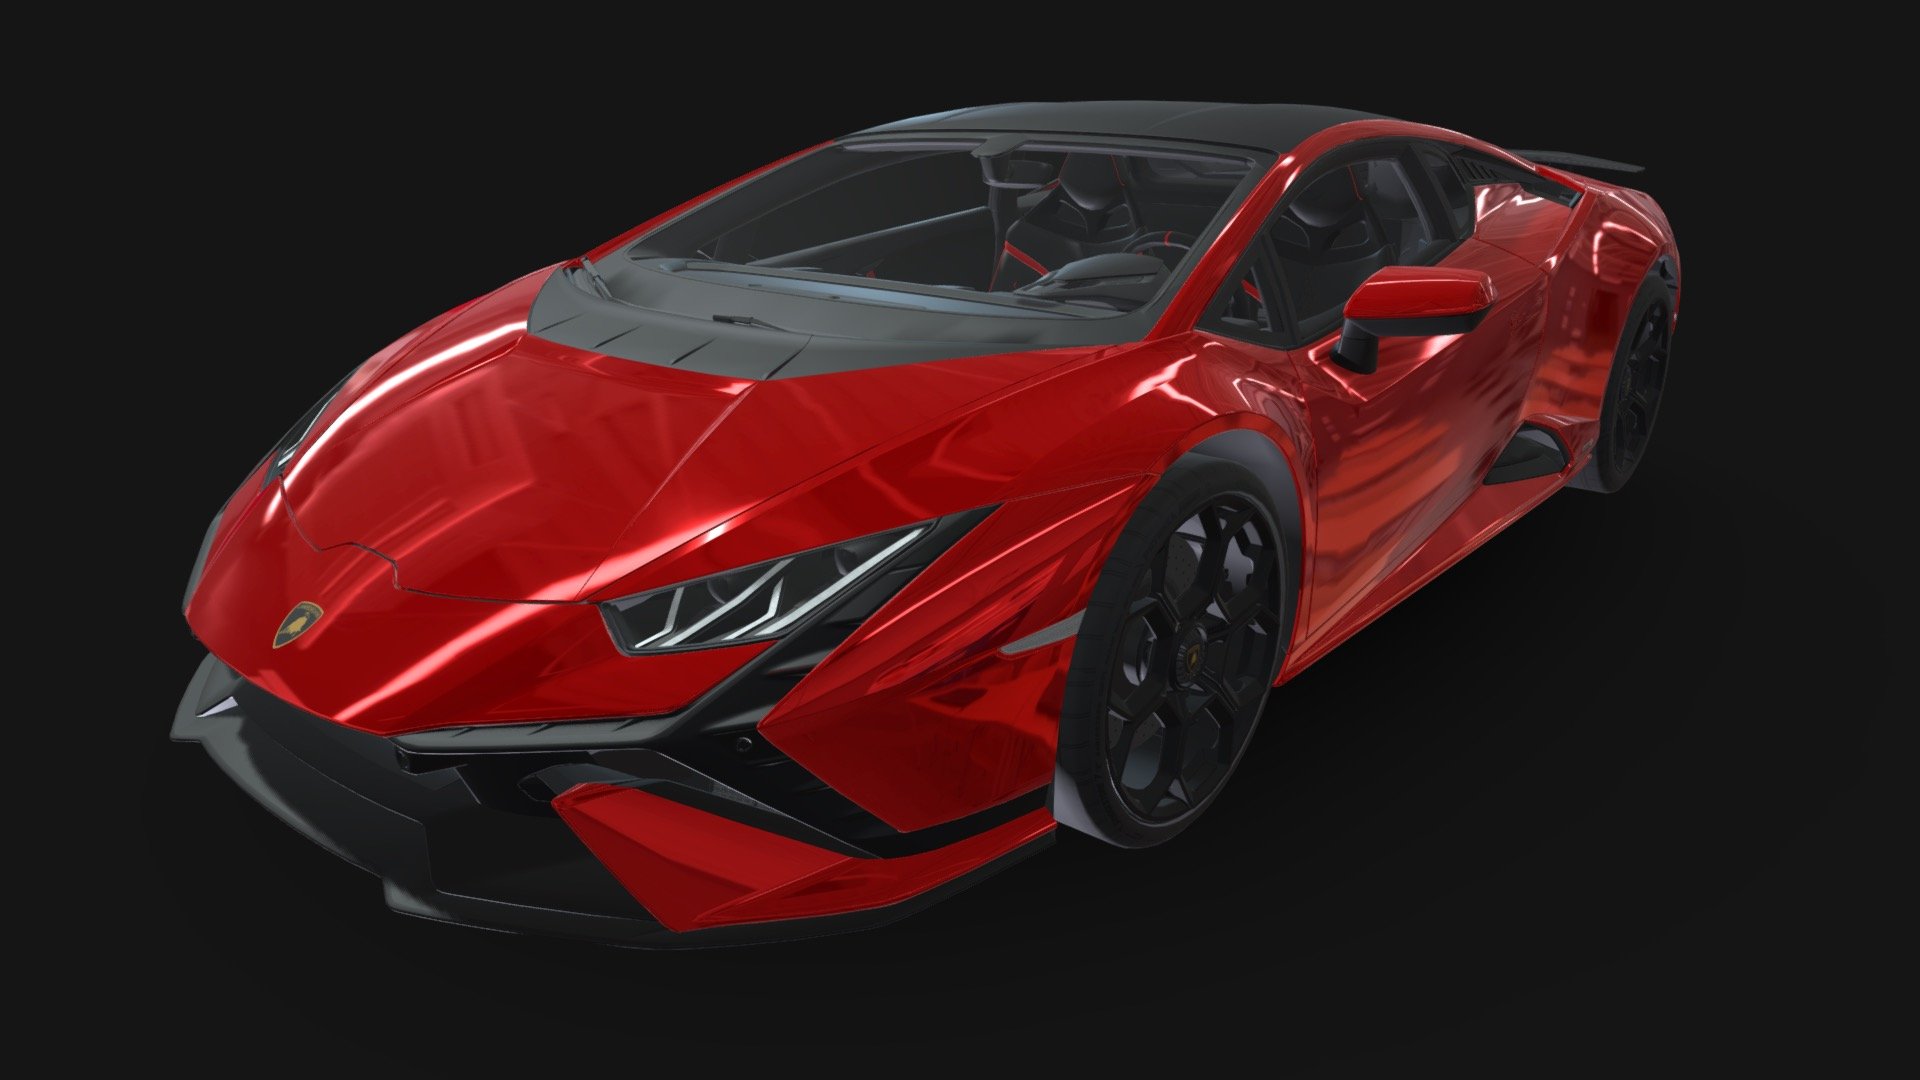 The 3D model depicts the Lamborghini Huracán Tecnica with precision, showcasing its supercar essence and technical sophistication. Highlighting its sleek lines and advanced aerodynamics, it's ideal for rendering, animations, or VR simulations 3d model